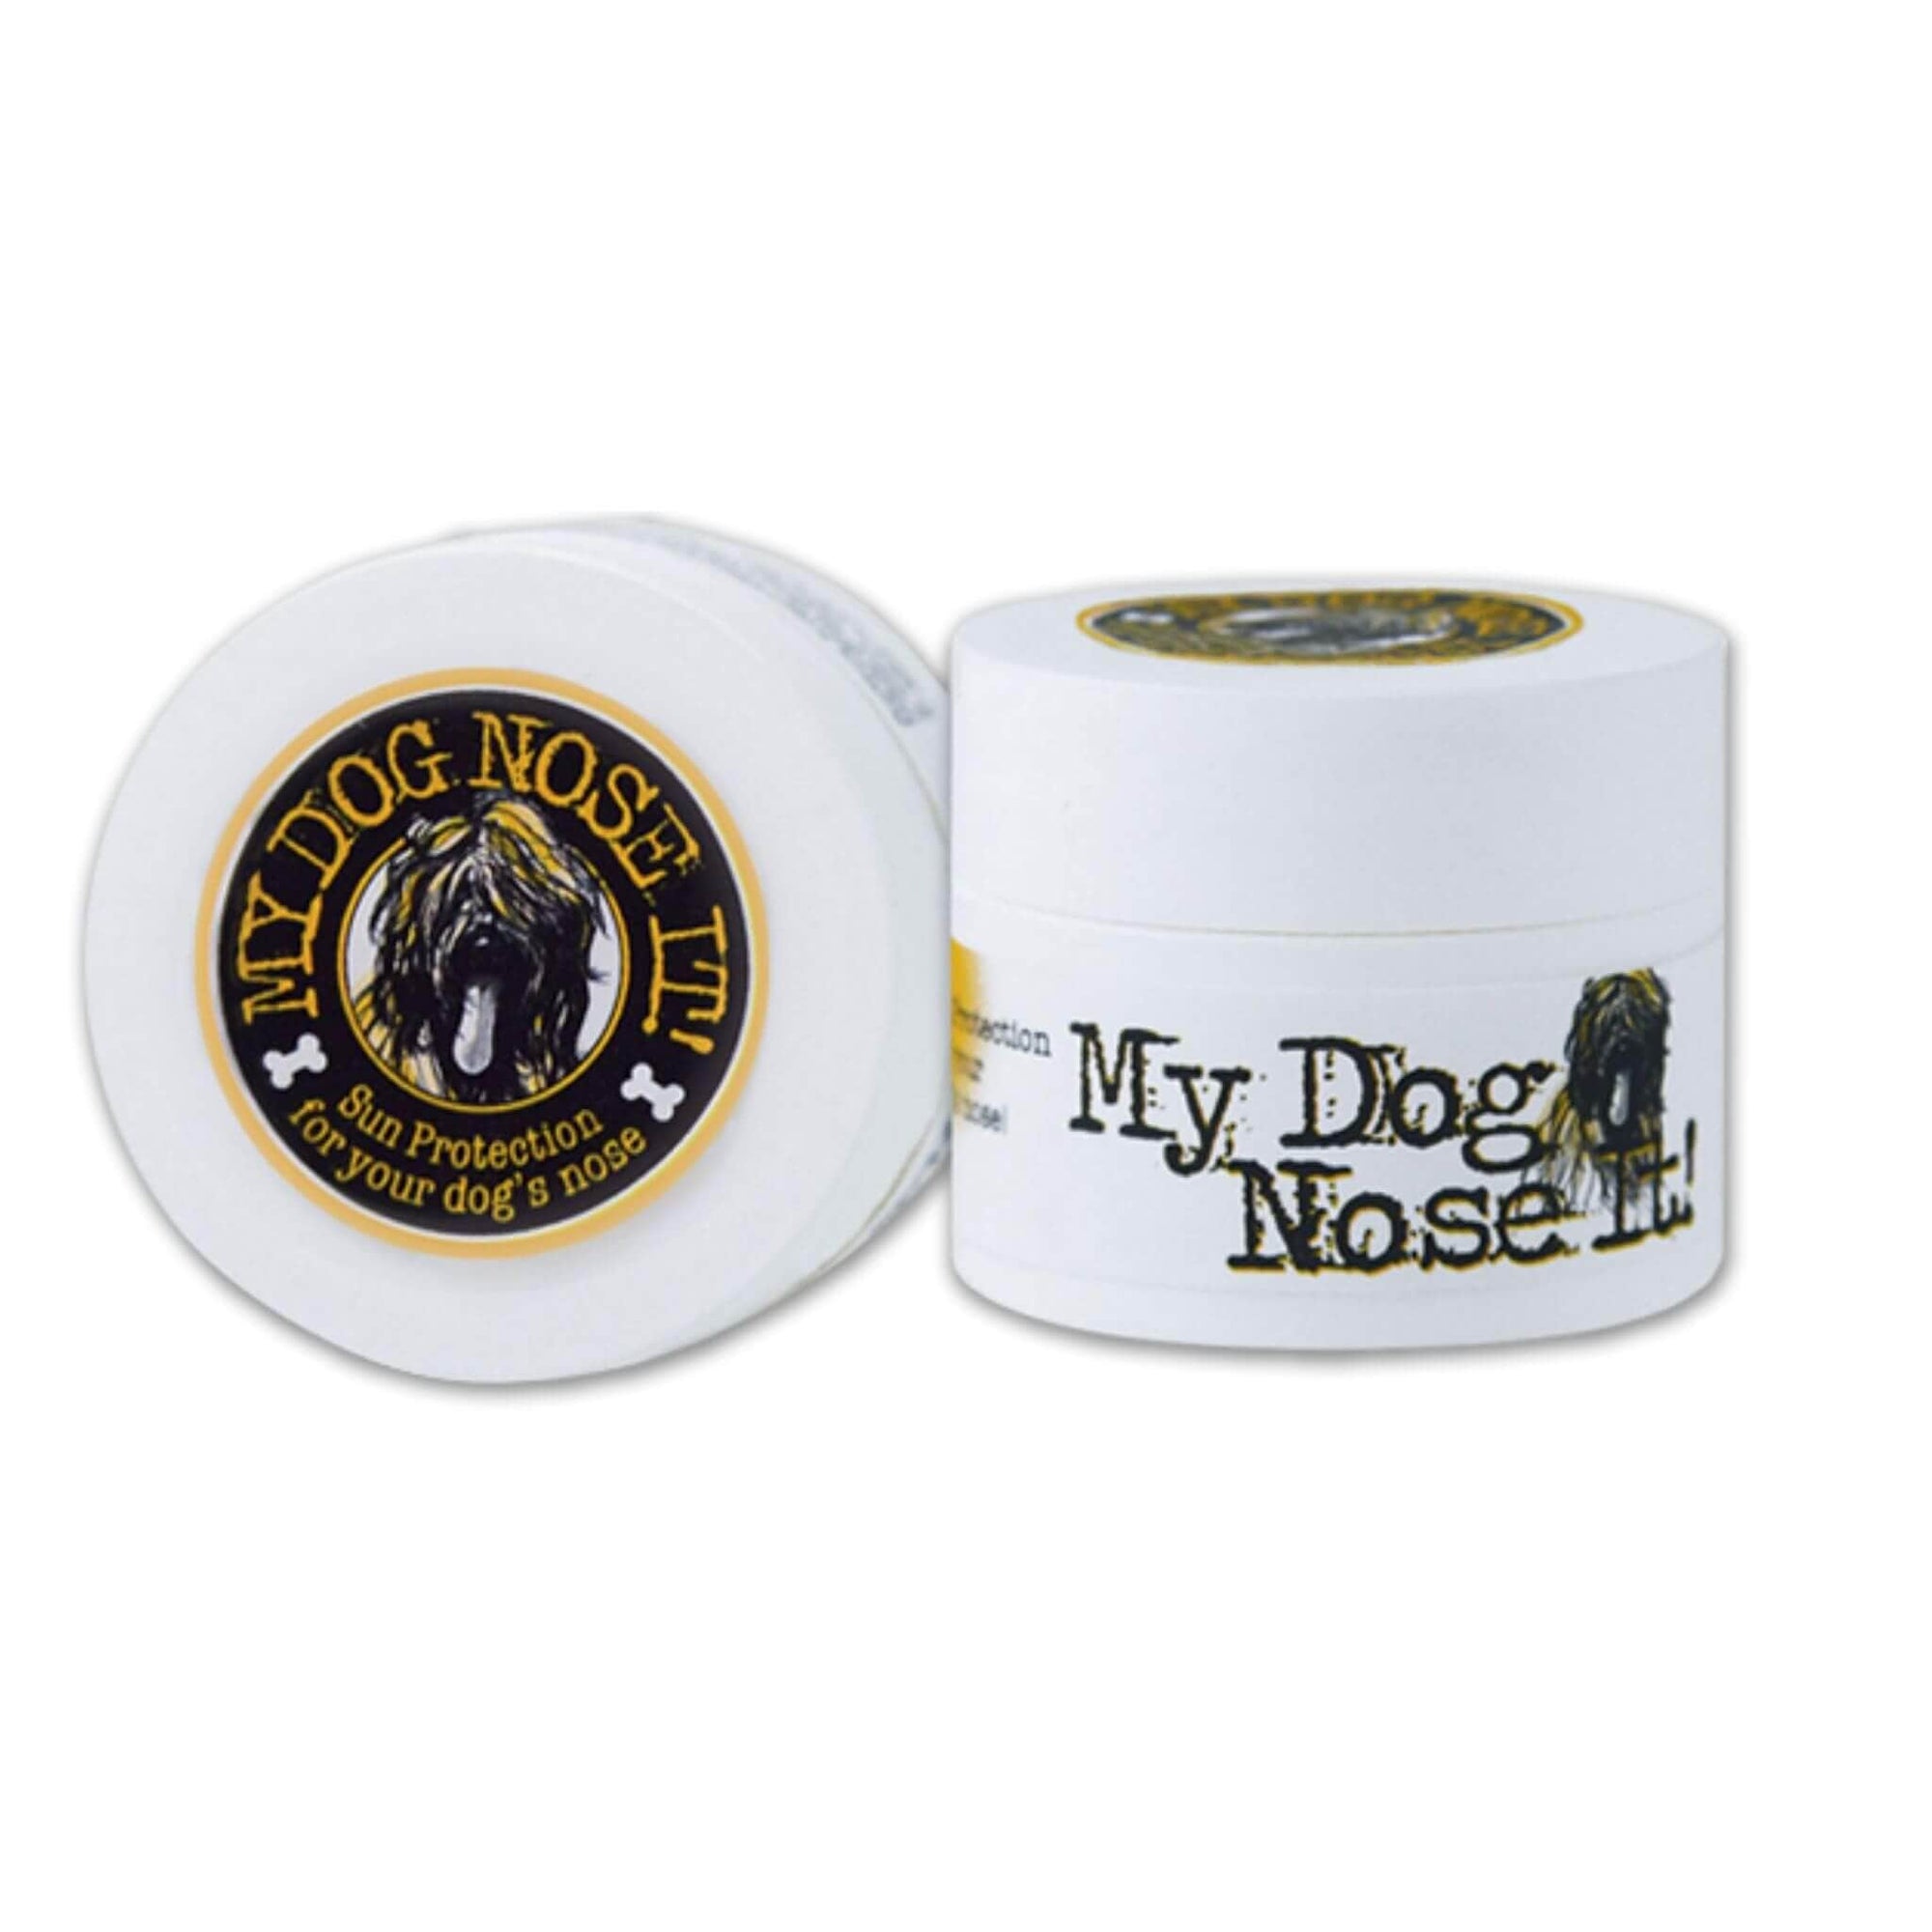 My Dog Nose It! - Sun Protection for your dog's nose